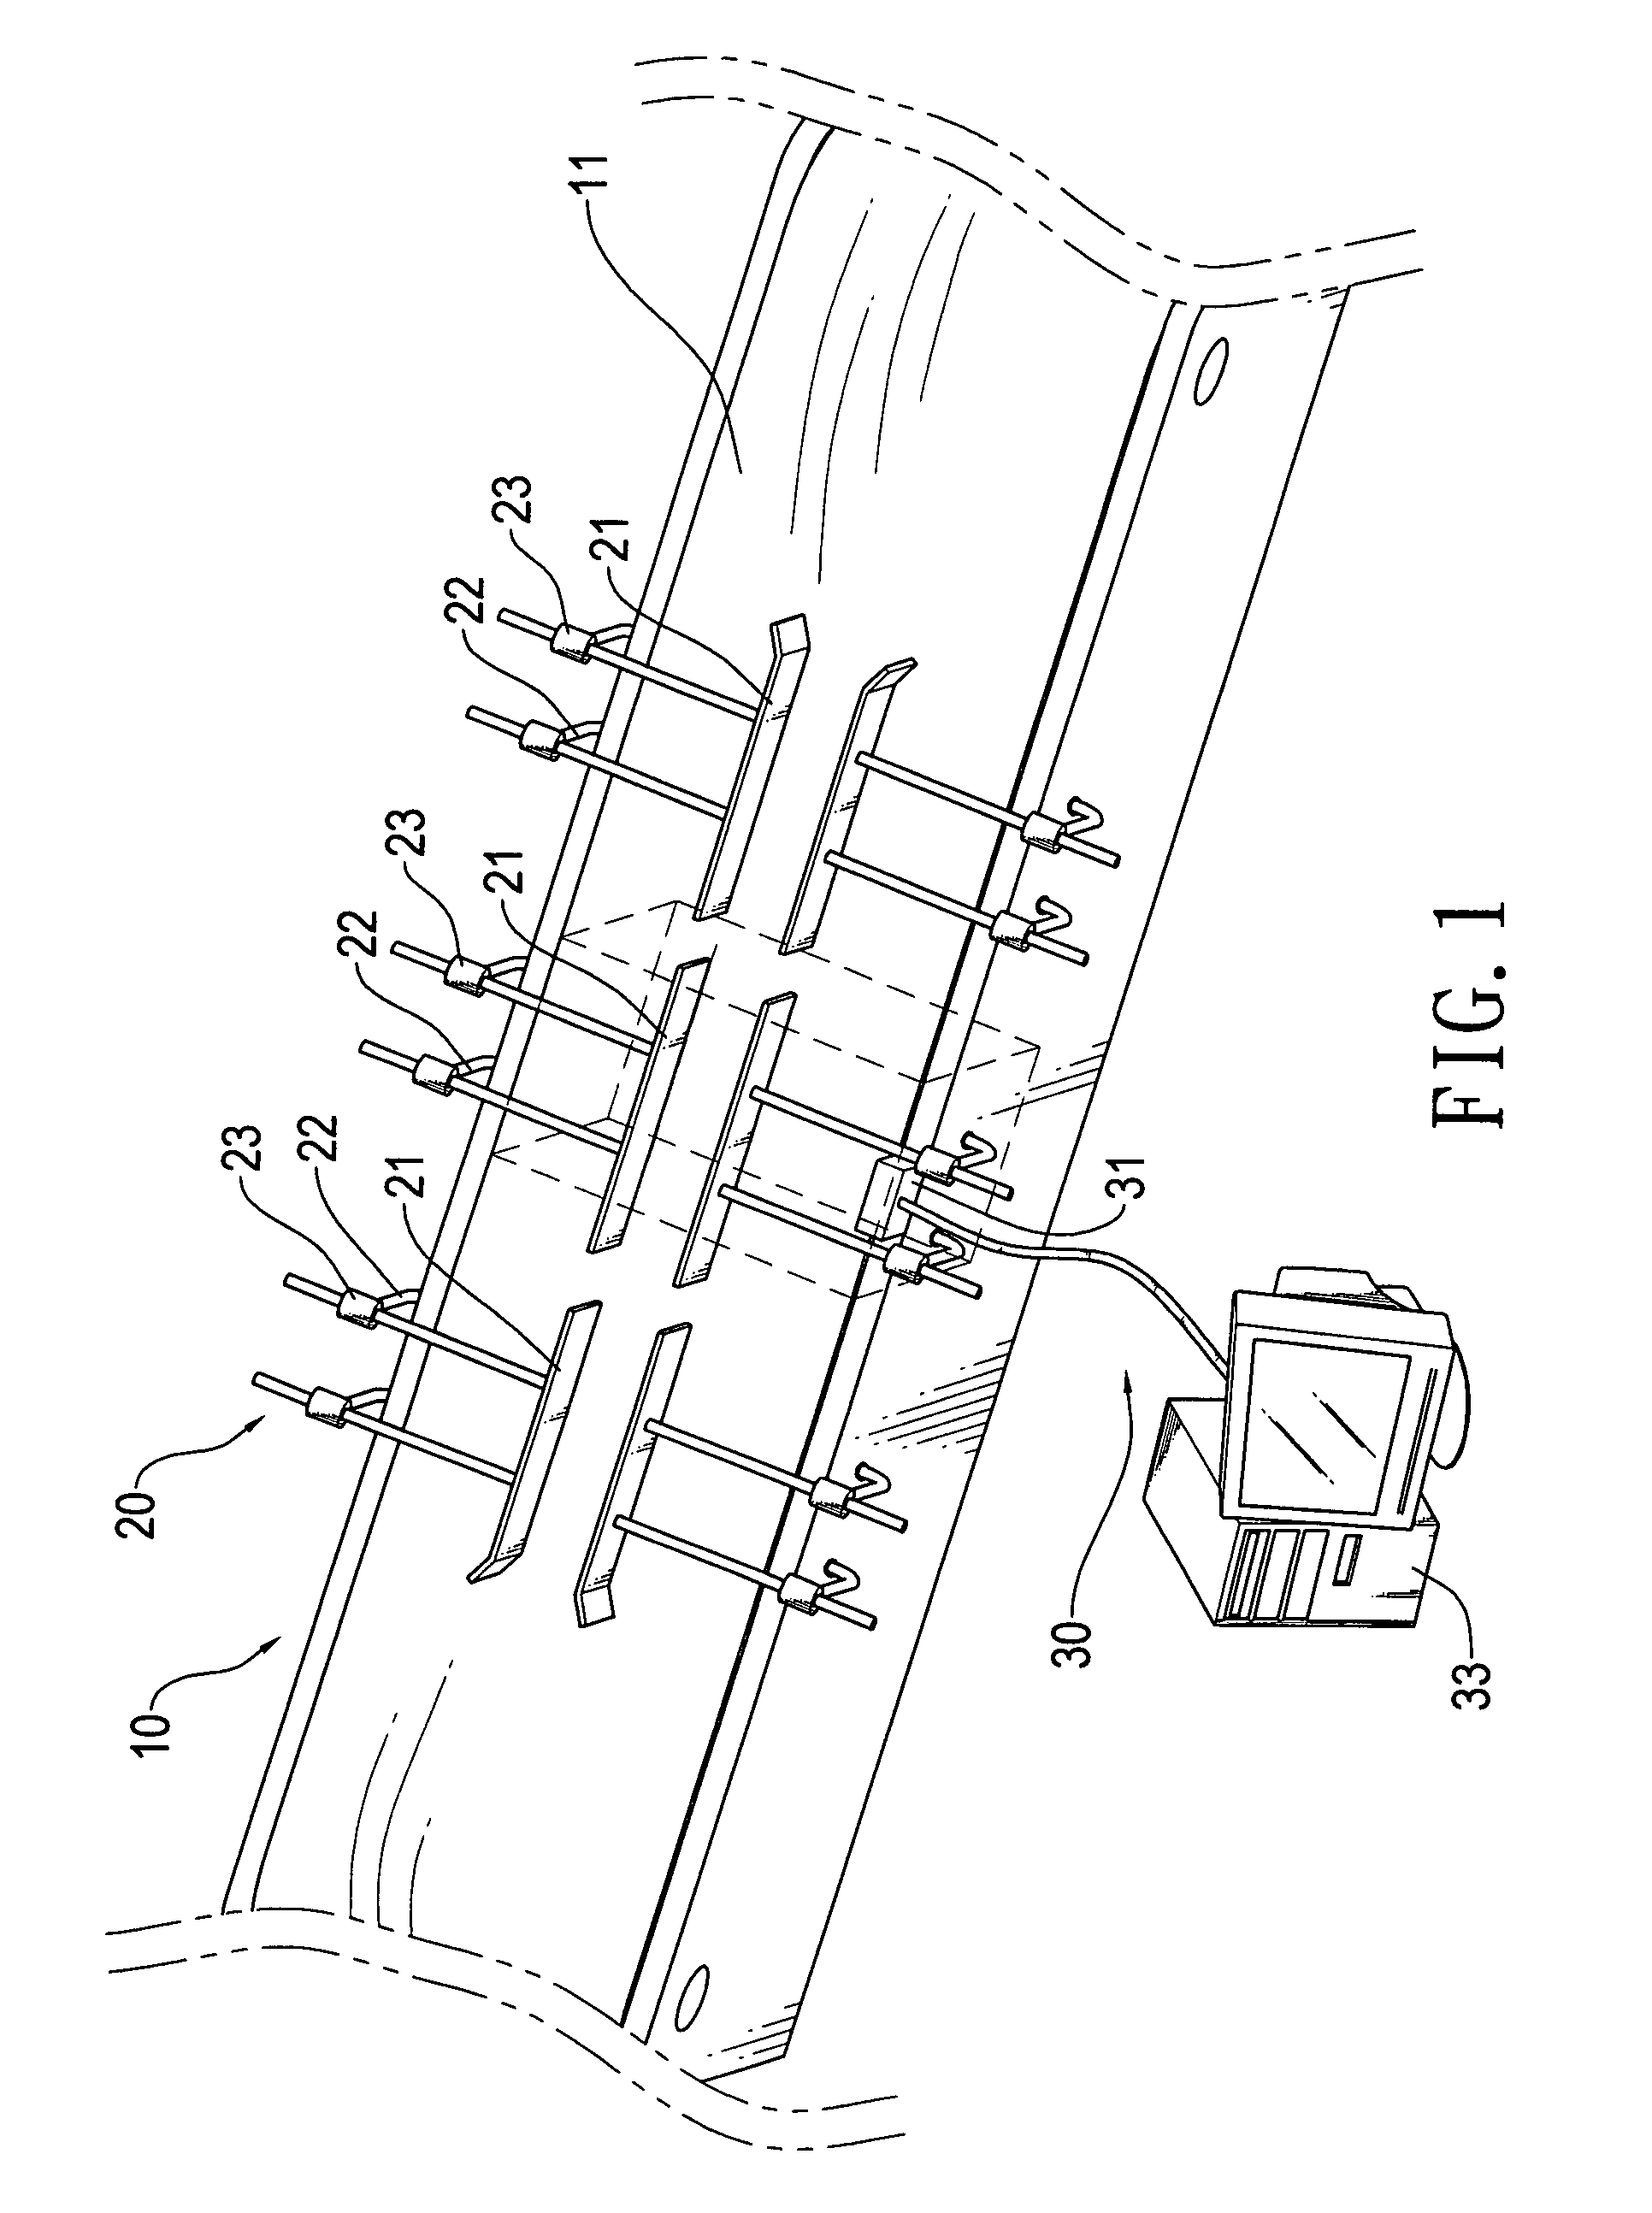 Electronic tag testing device and method